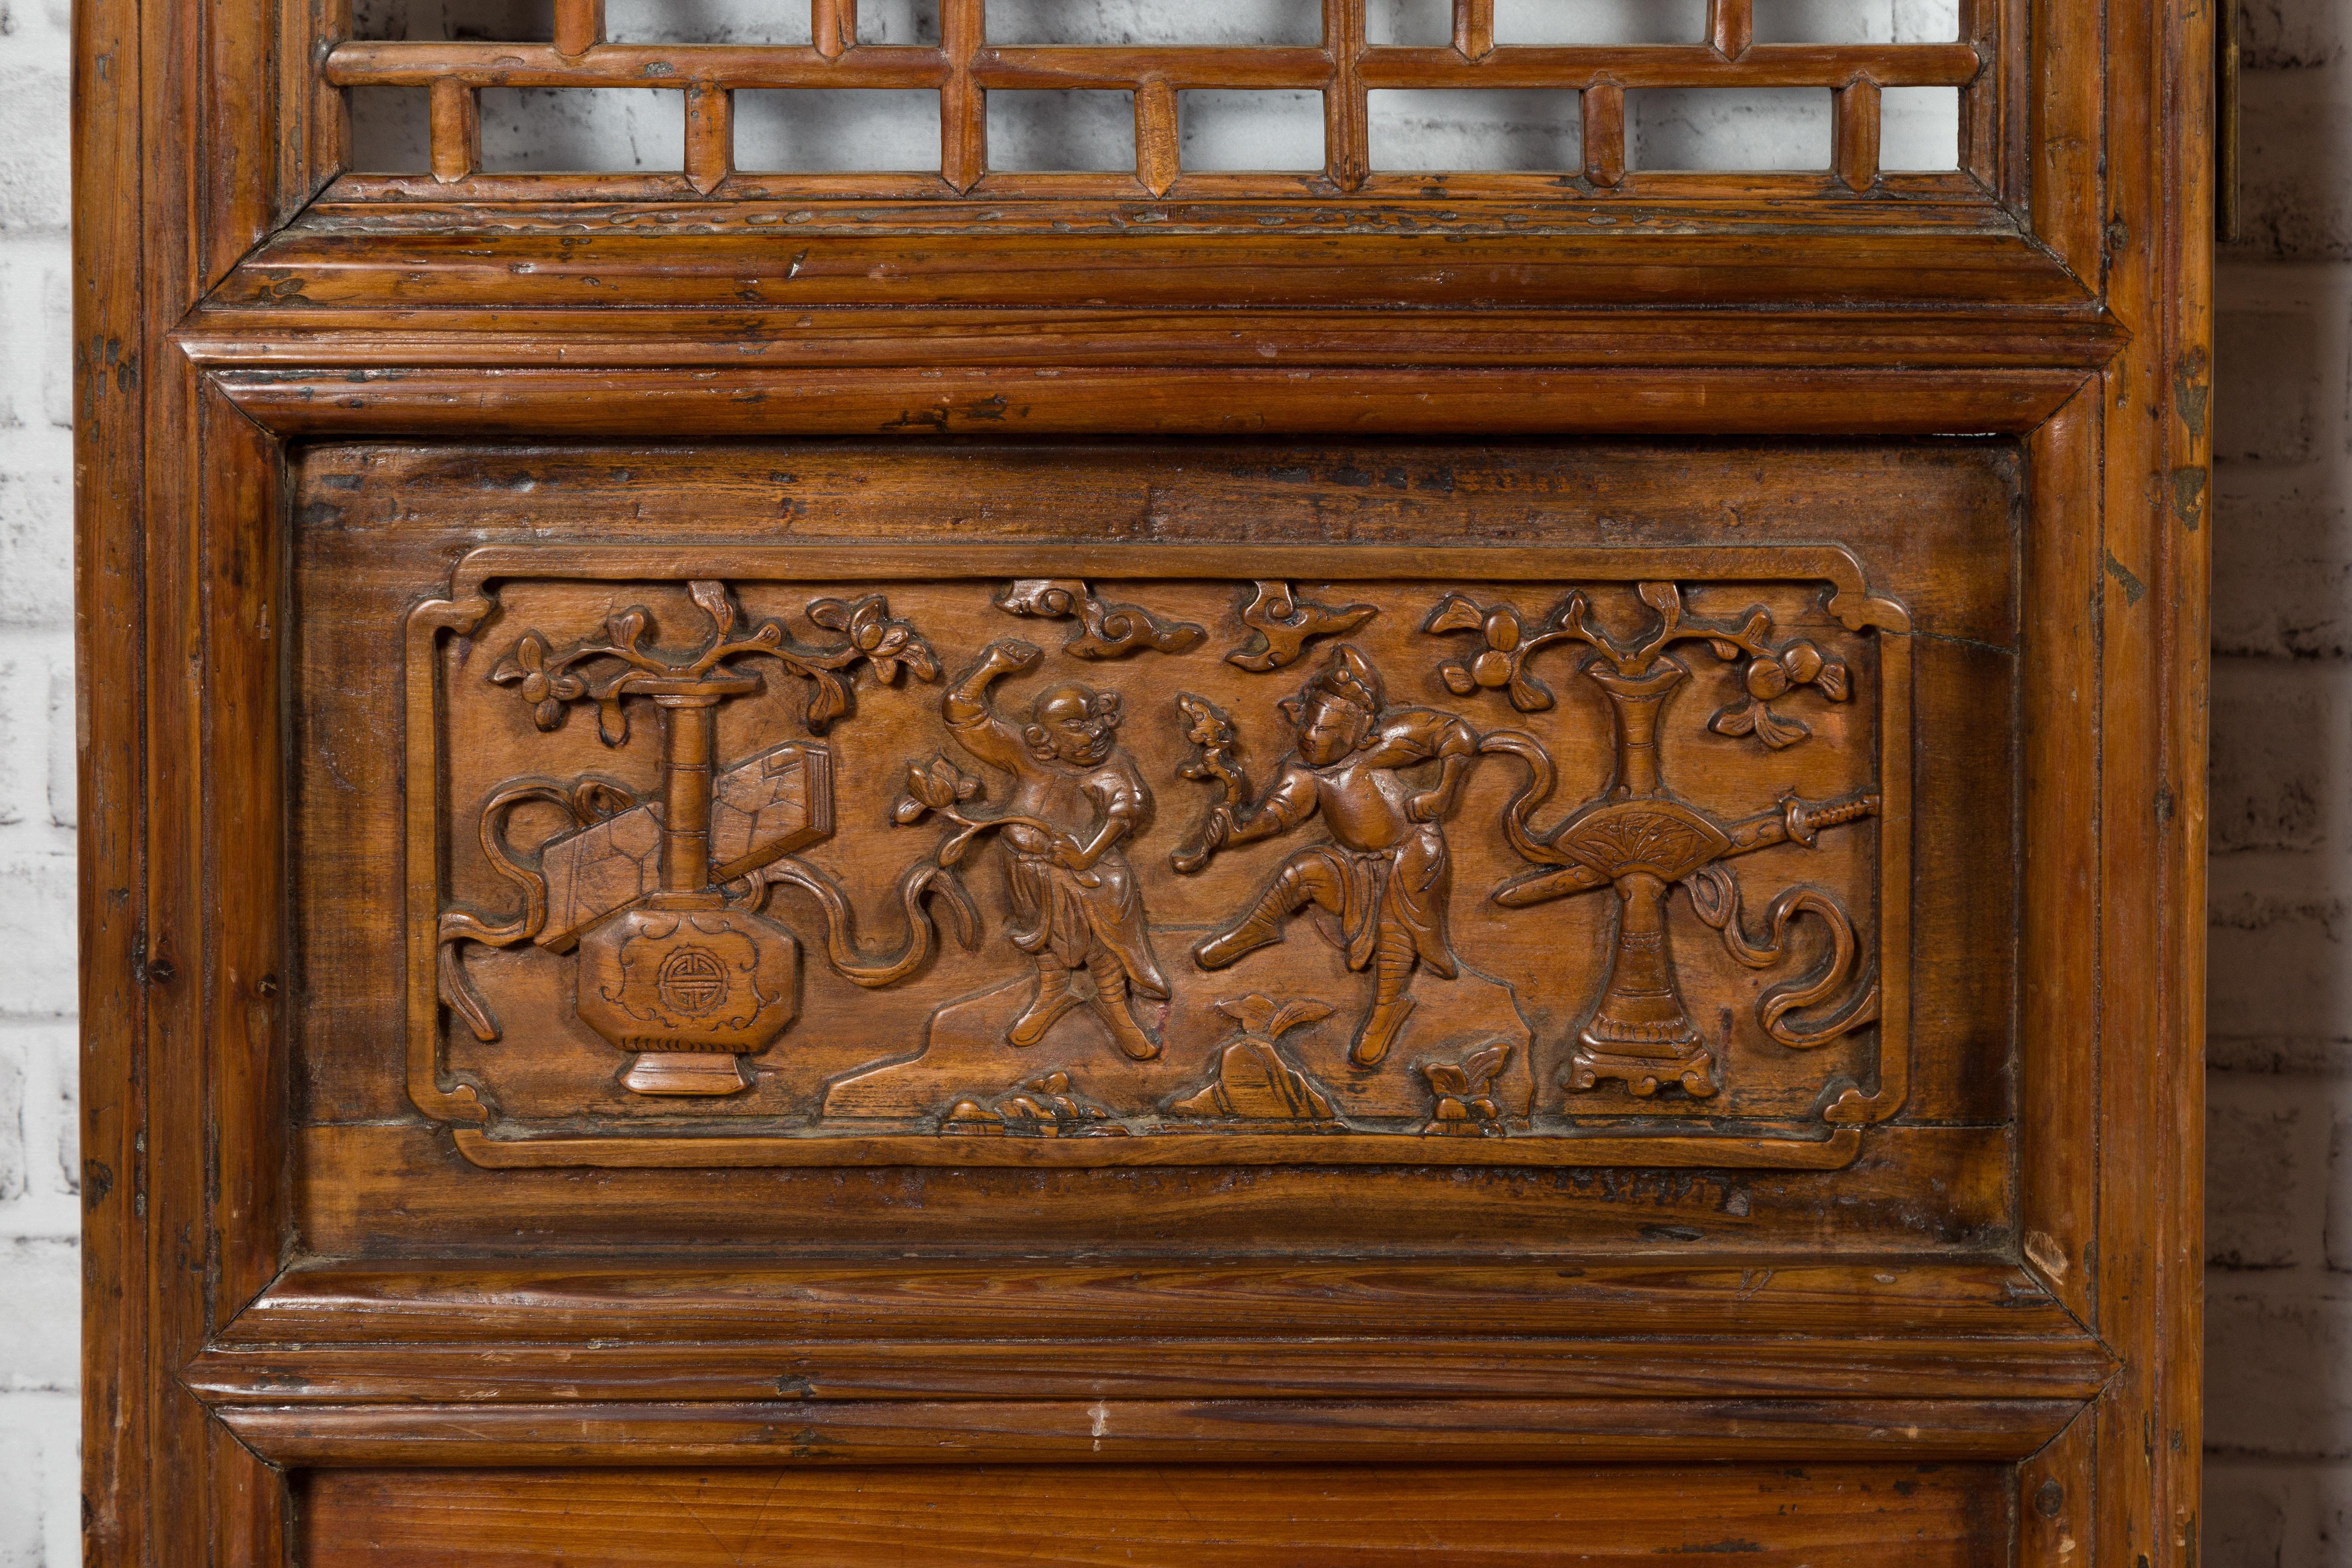 Pair of Chinese 19th Century Screens with Fretwork and Low-Relief Carved Panels 5